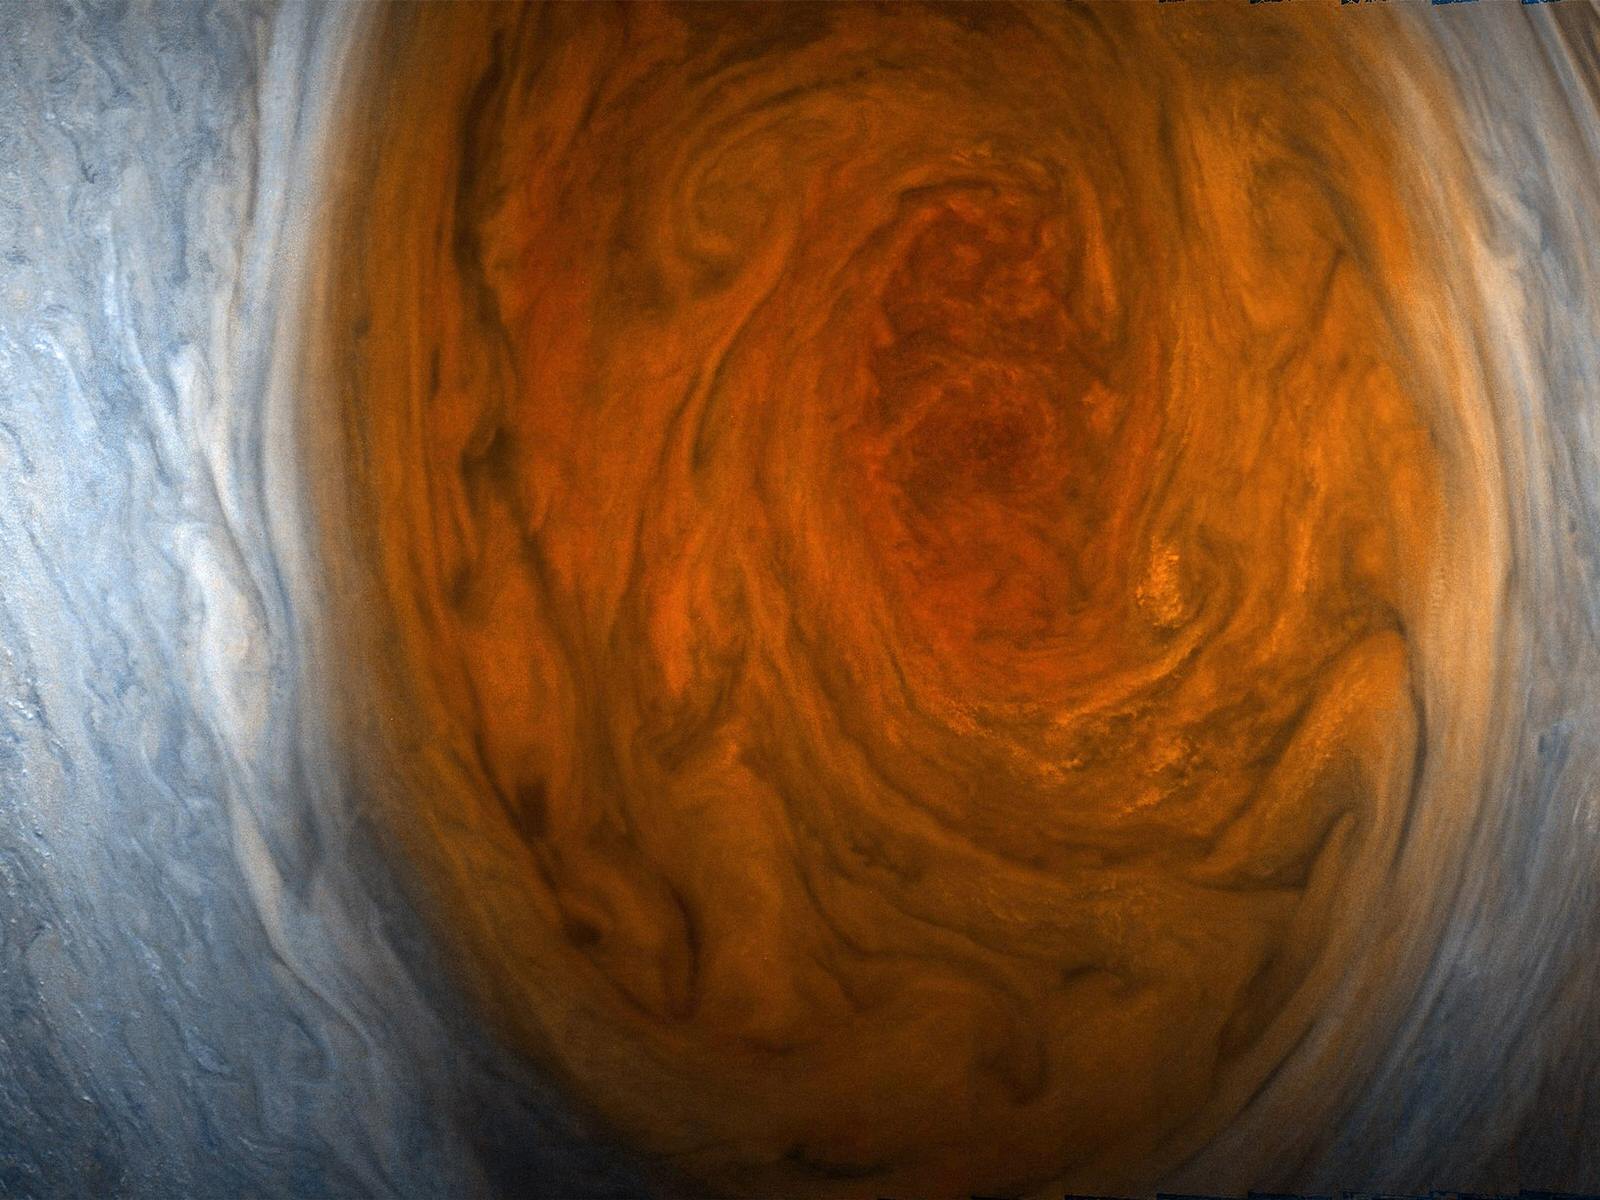 Nasa Just Shot The Closest Ever Photos Of Jupiters Great Red Spot